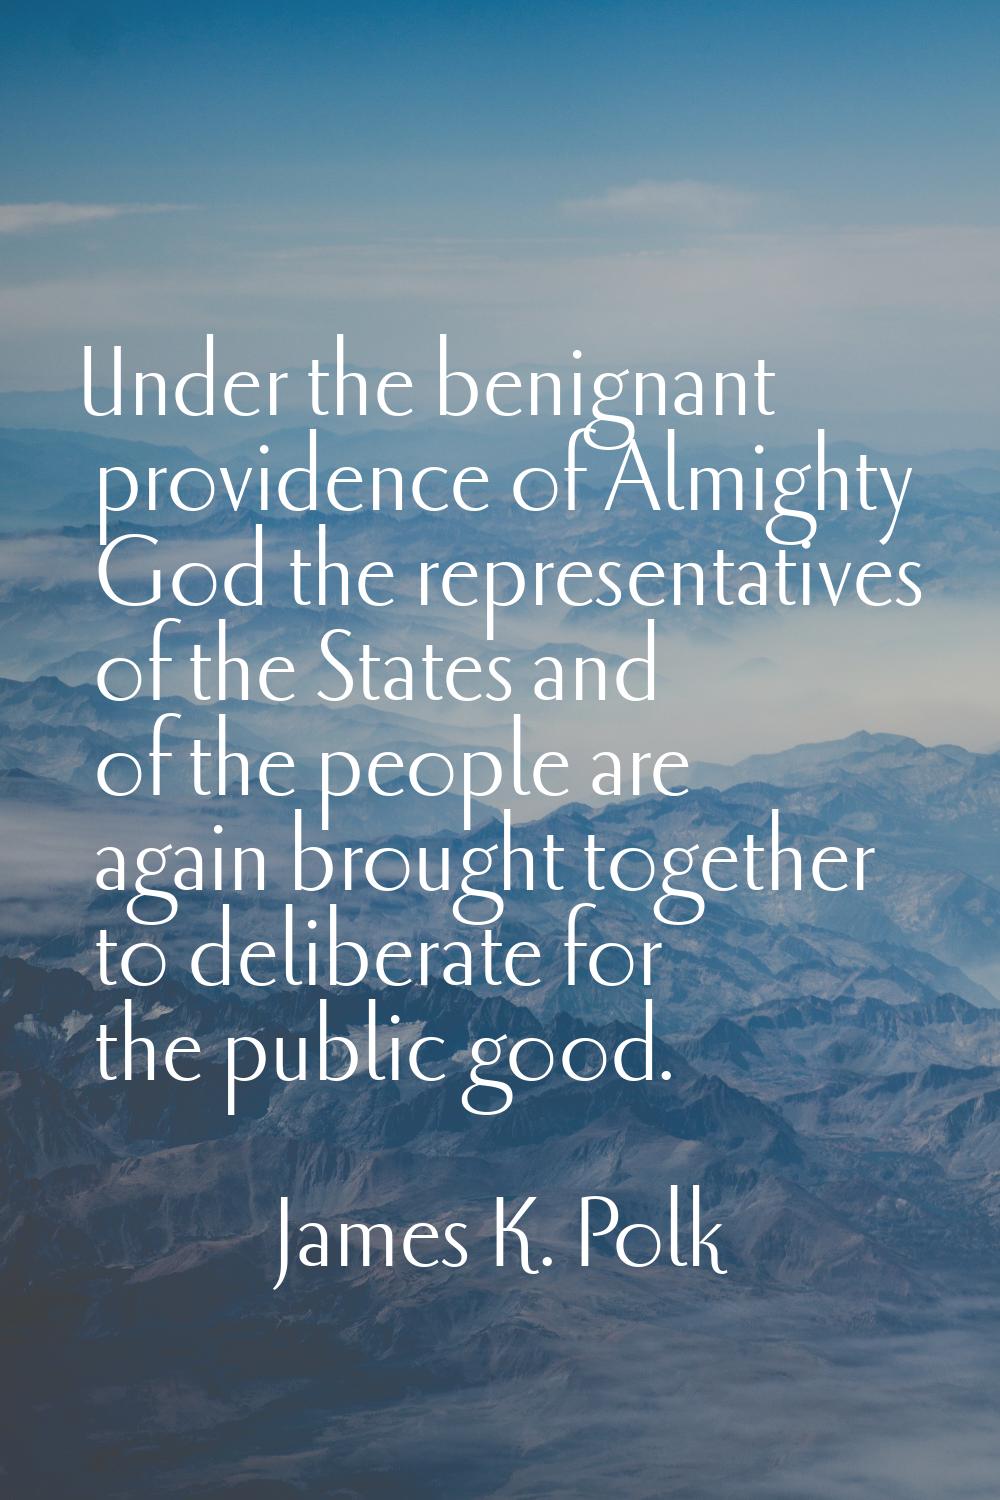 Under the benignant providence of Almighty God the representatives of the States and of the people 